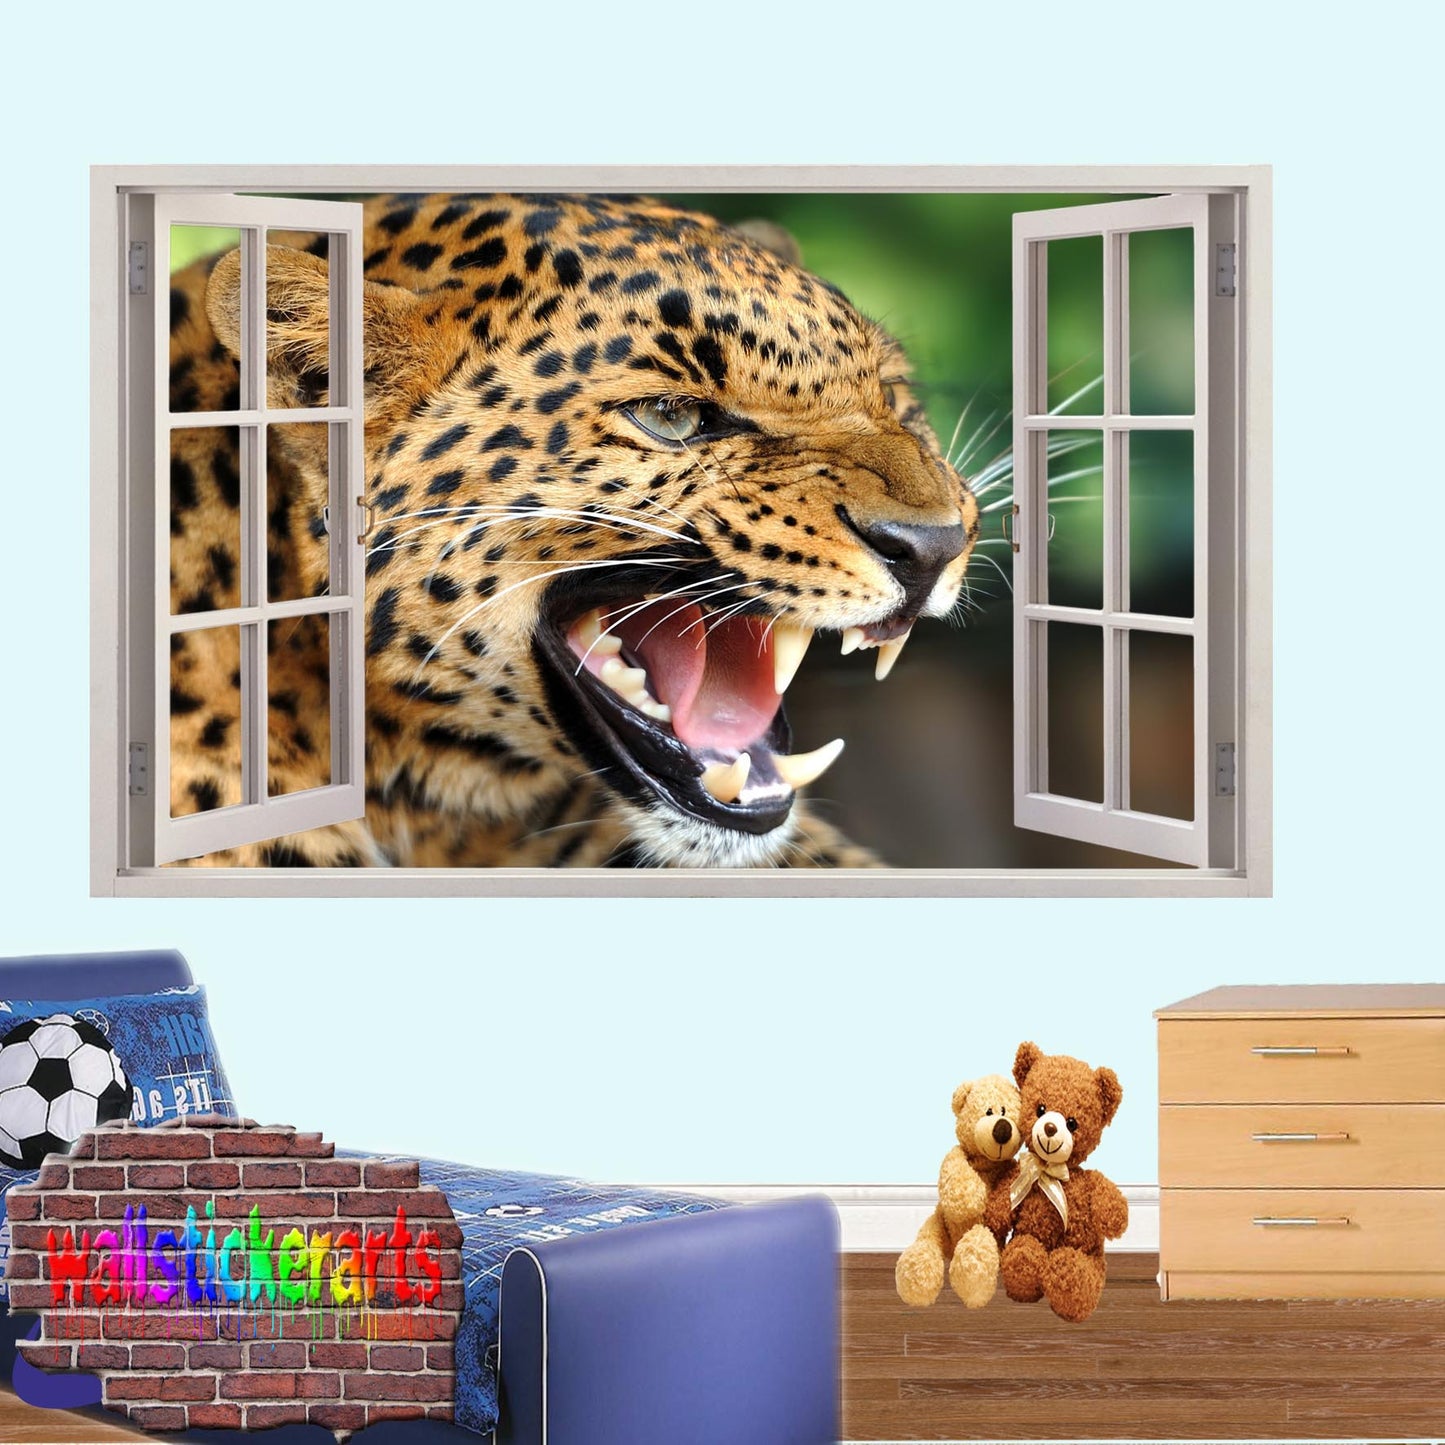 Wildlife Animals Leopard 3d Art Smashed Effect Wall Stickers Room Office Nursery Shop Decor Decal Mural